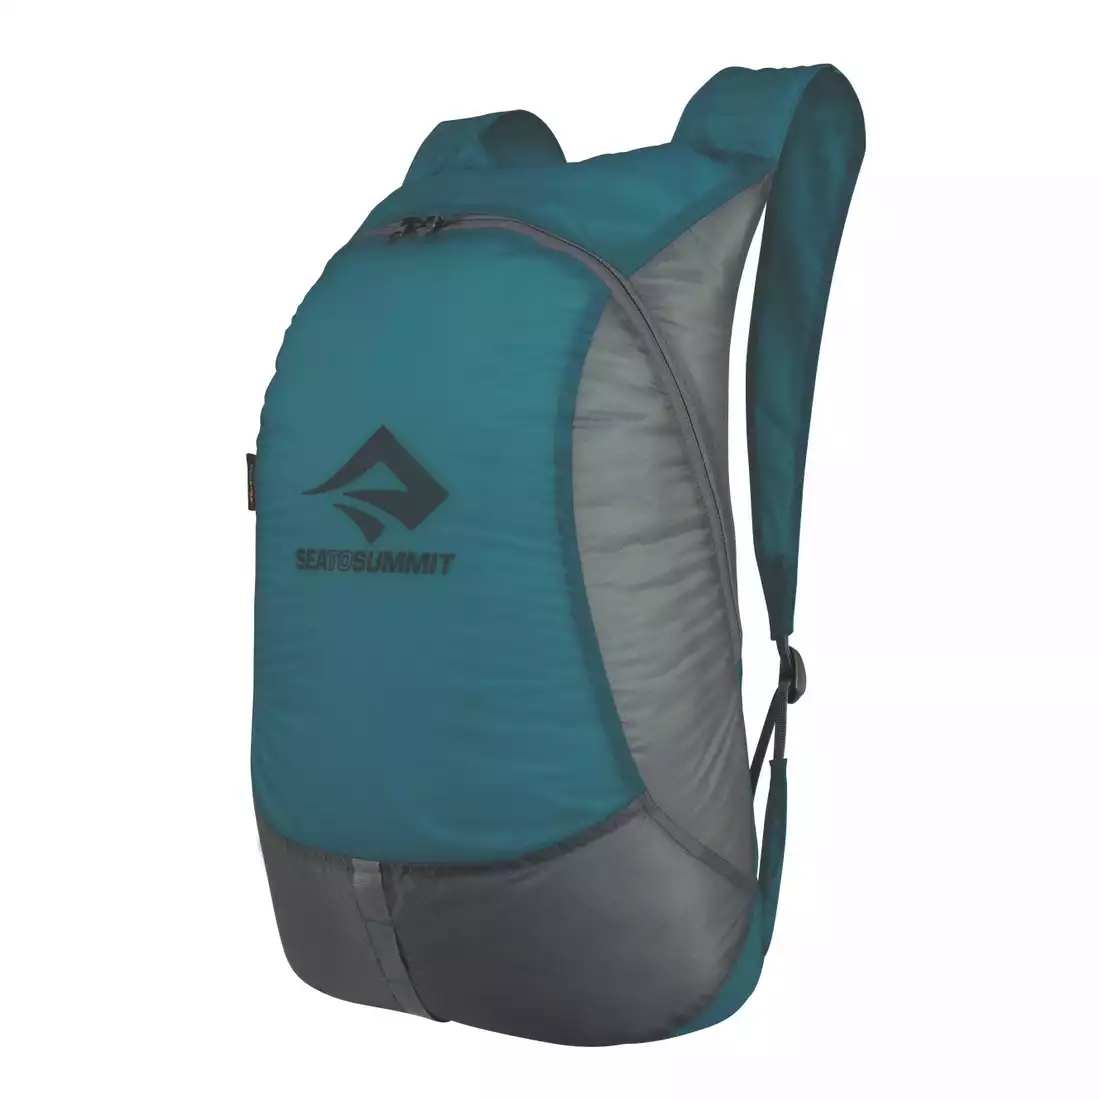 SEA TO SUMMIT backpack Ultra-Sil® Daypack 20L, Pacific blue AUDPN/PB/UNI